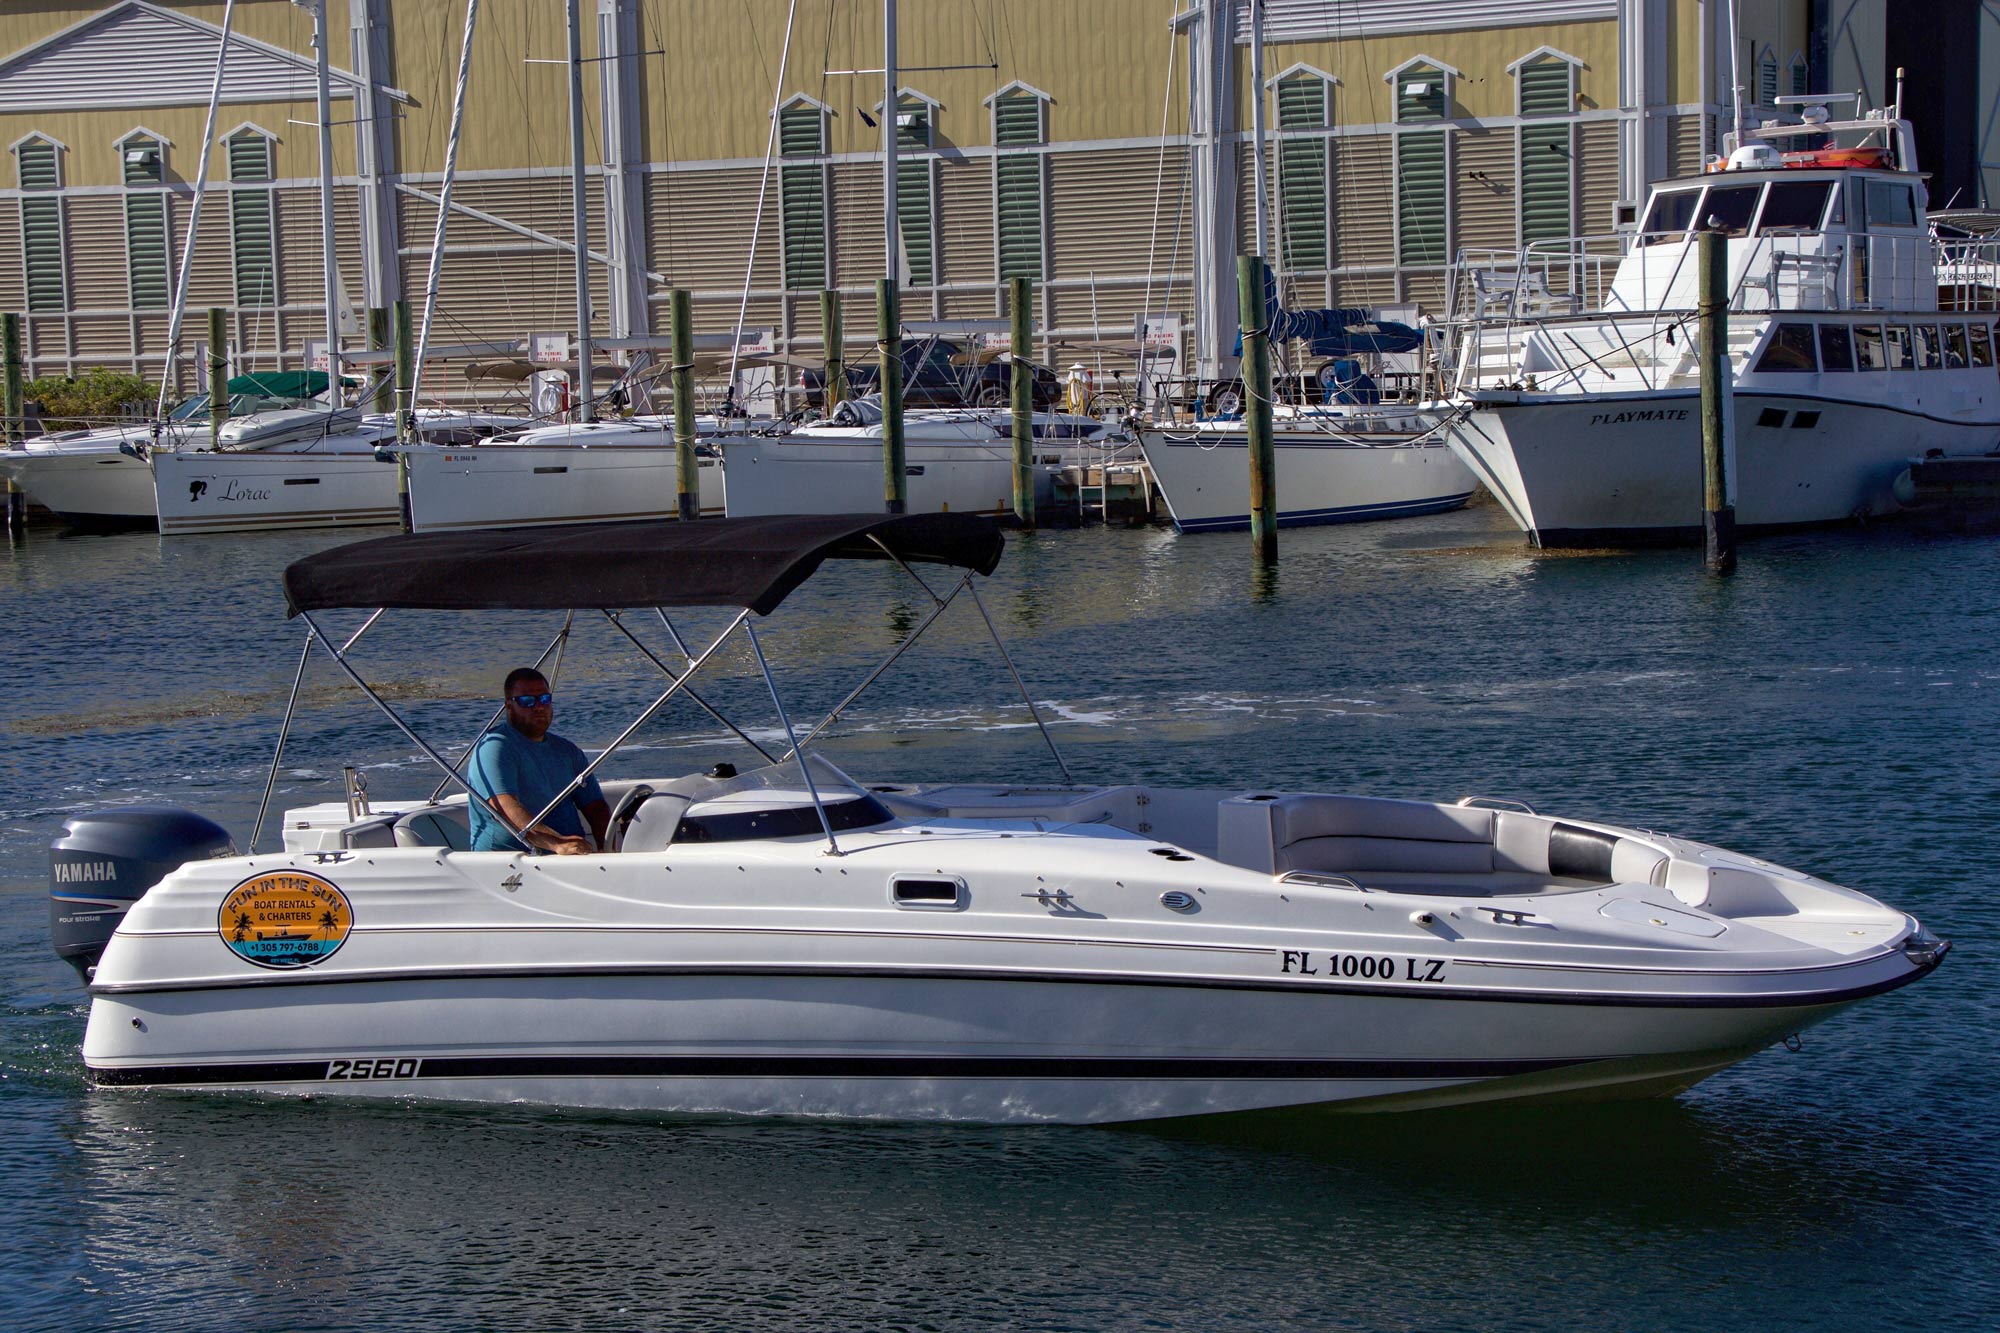 26ft Century deck boat, powered by a 225hp Yamaha four stroke